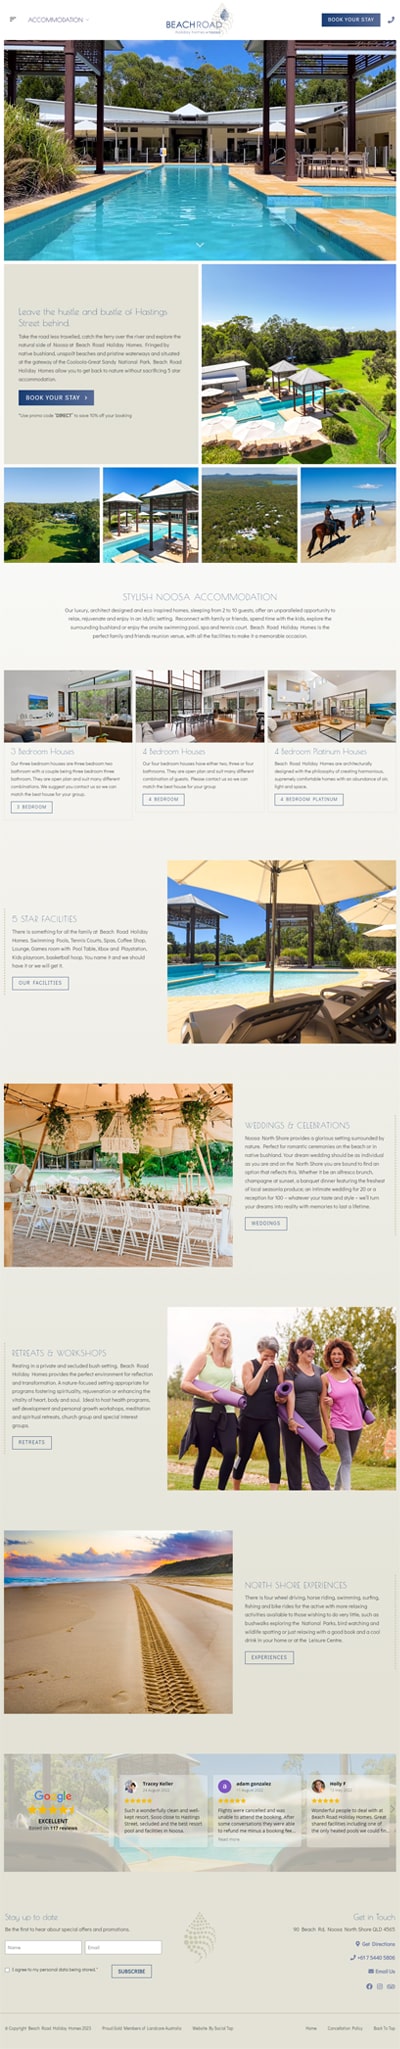 Our Work Hospitality Tourism Website Design Beach Road Holiday Homes